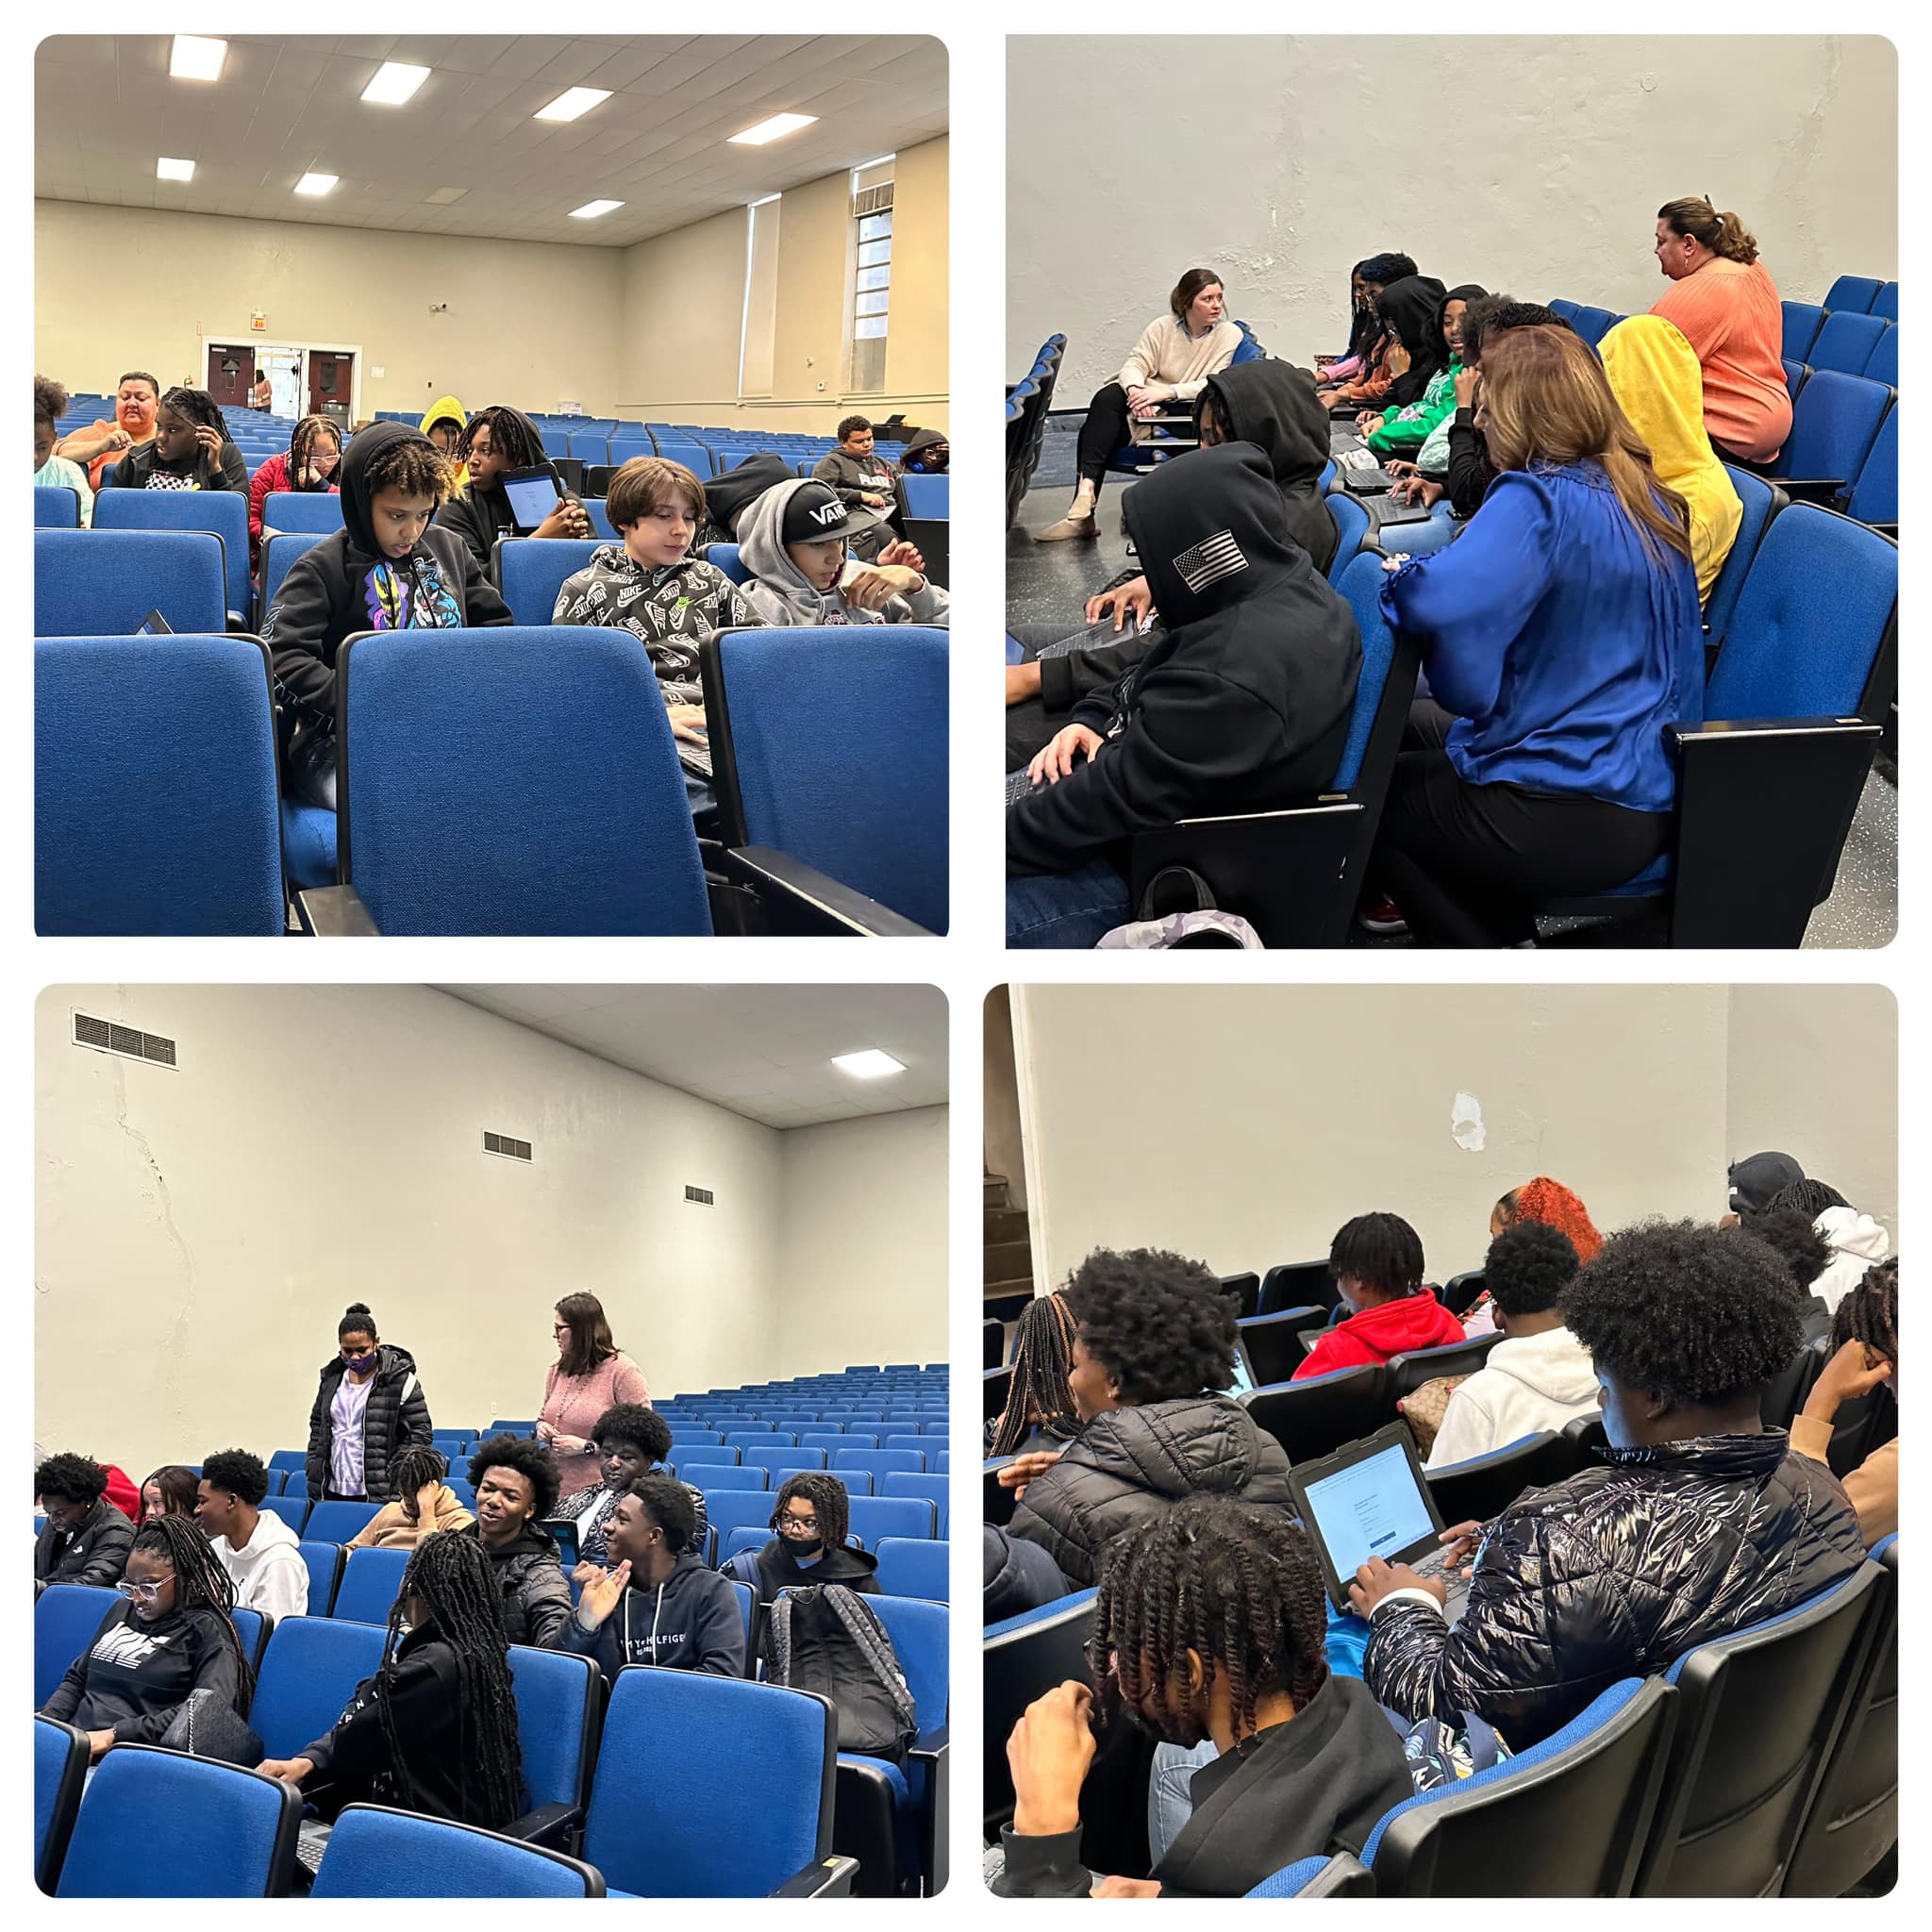 Students in grades 7-12 met with Mrs. Alicia Thompson and Mrs. Kaitlyn Cox from the Myers Briggs Company today to investigate their career interests through the VitaNavis Platform. This is the kickstart to our commitment that every student that leaves Ashland High School will be prepared for their next step in life, no matter if it’s to a career, technical/trade school, or college or university. Huge thanks to the teachers, AHS counselor- Mrs. Teresa Elam, career coach- Ms. Meg Thomas, teacher- Ms. Jessica Terry, and curriculum coordinator - Amanda Ford for helping get the students log in and navigate through the platform!